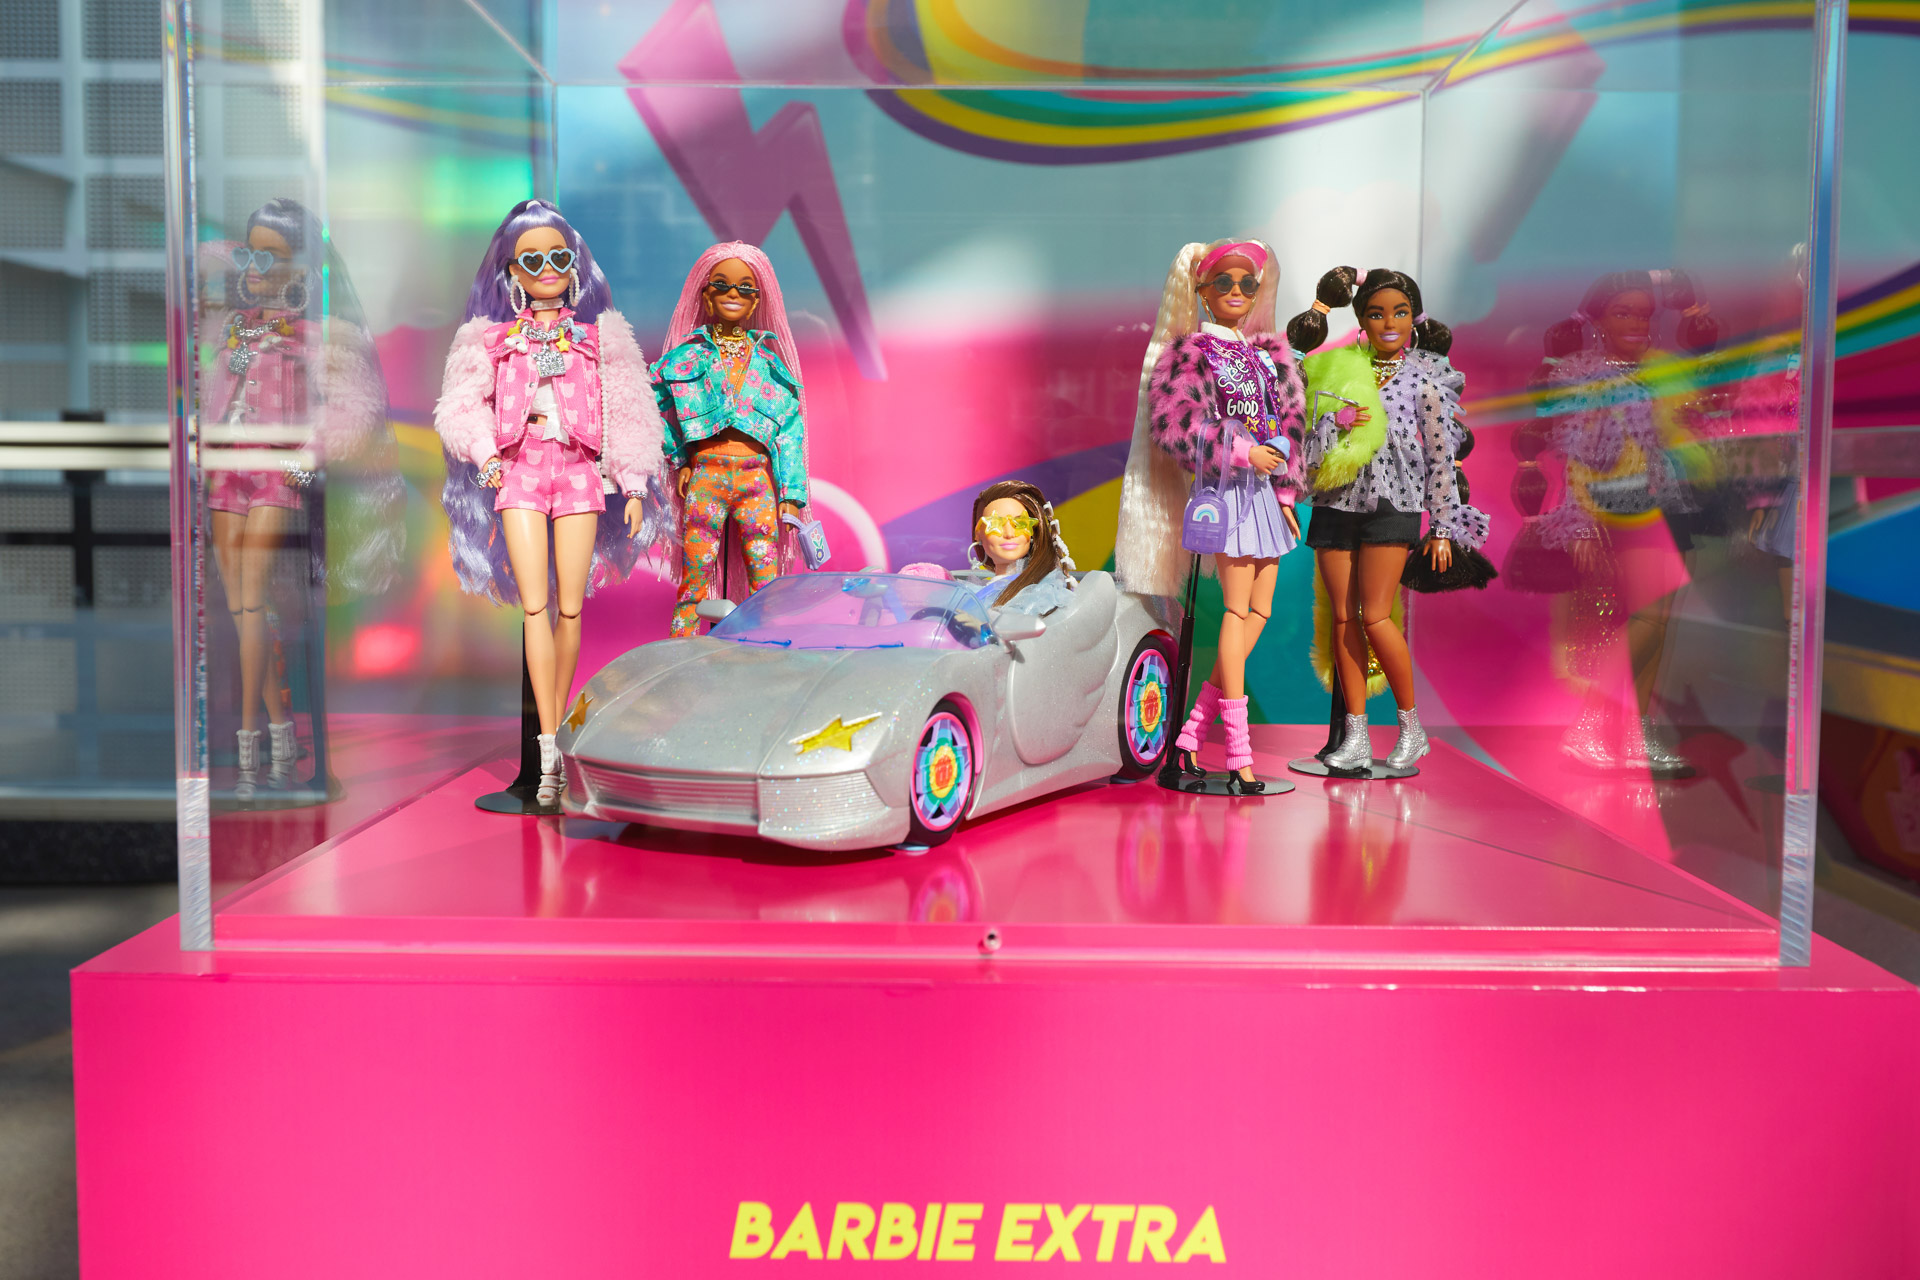 snor Stof canvas Life-Size Barbie Car for L.A. Show Is A Fiat 500 With Wings For Doors |  Carscoops